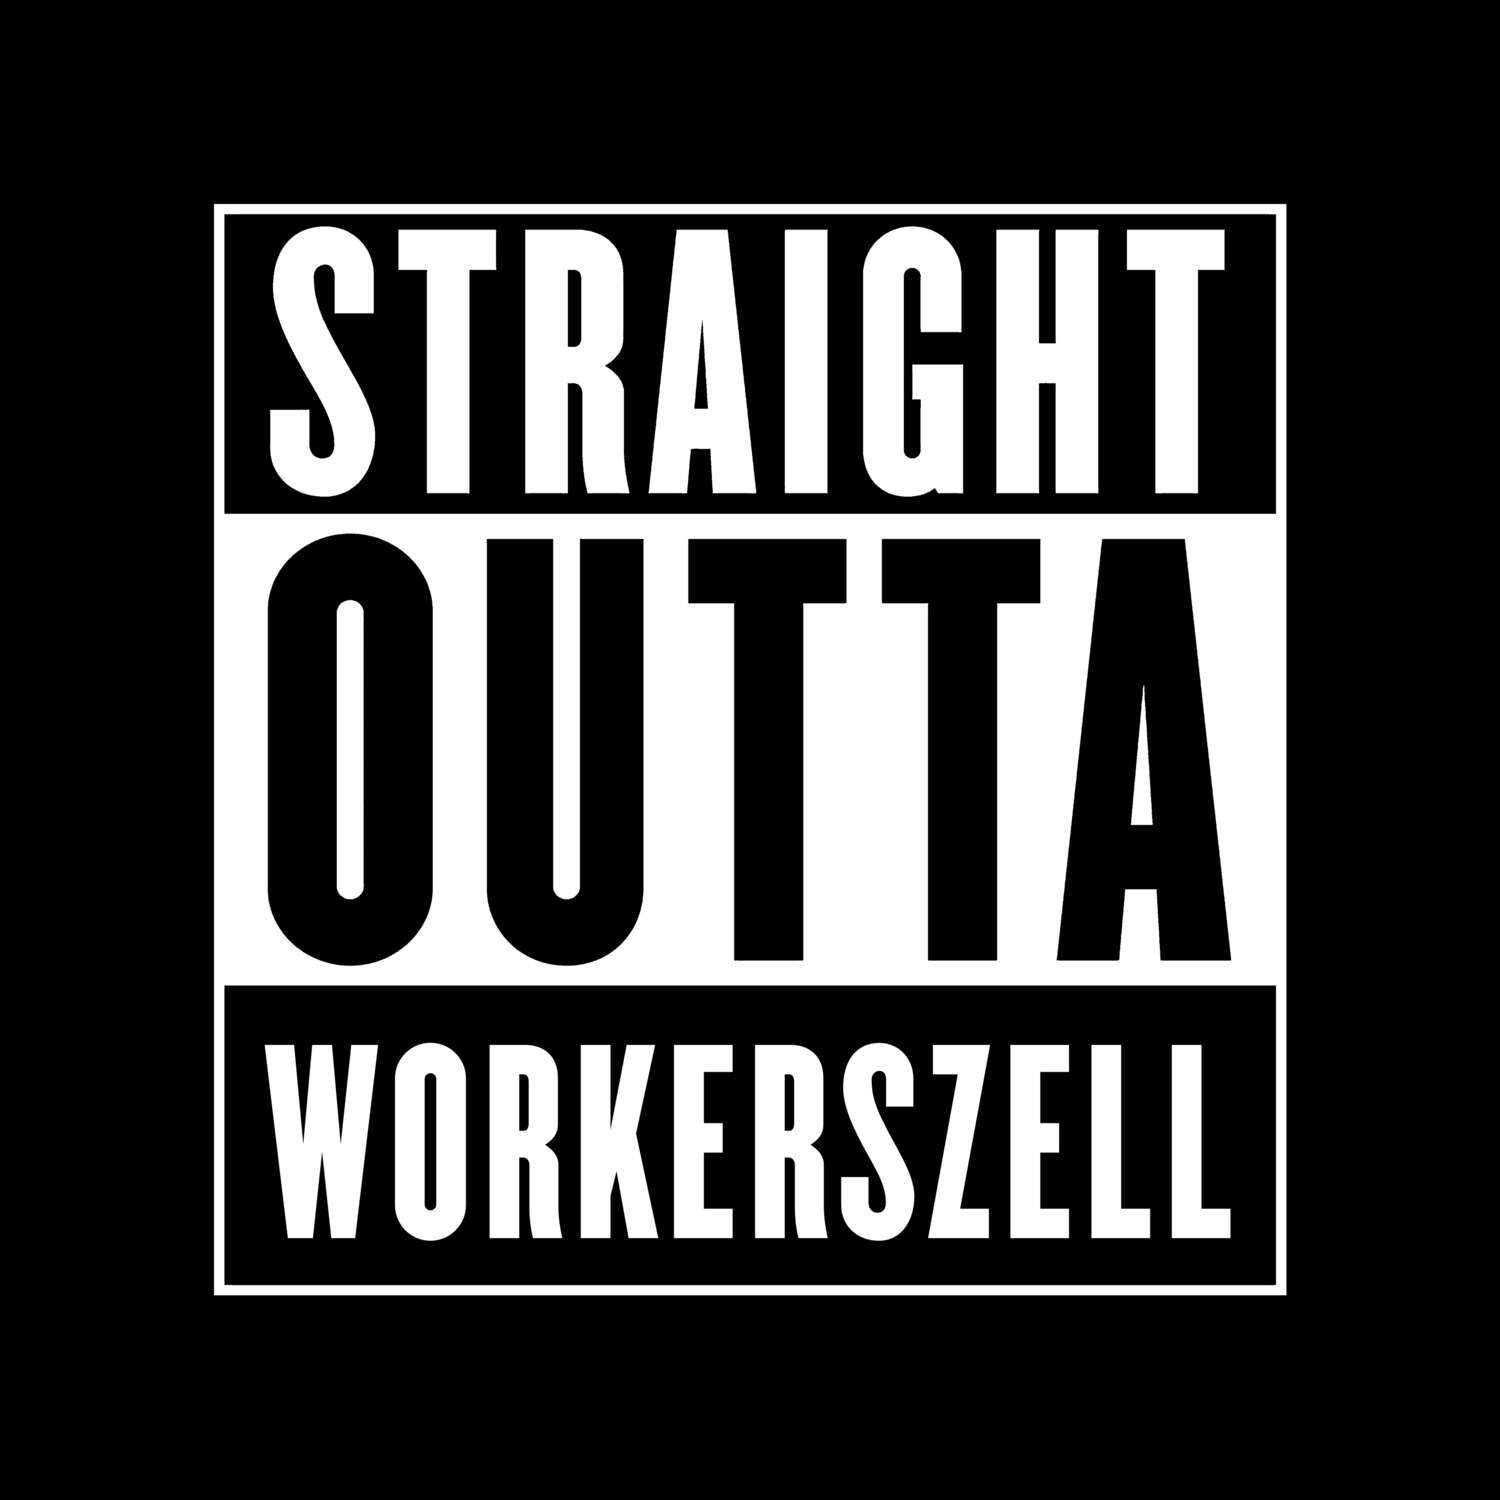 Workerszell T-Shirt »Straight Outta«